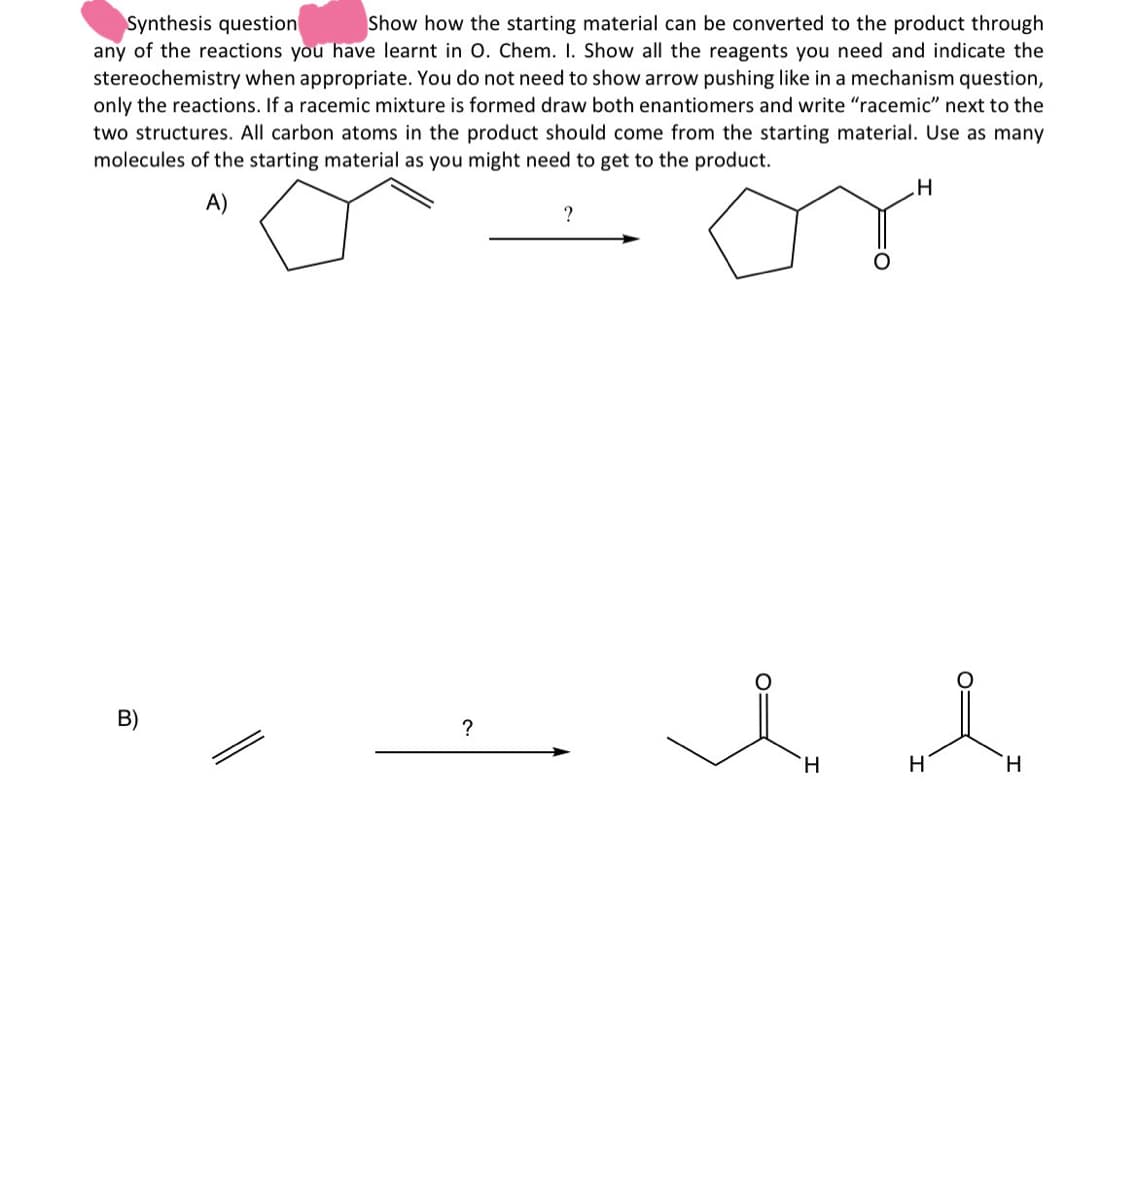 Synthesis question
Show how the starting material can be converted to the product through
any of the reactions you have learnt in O. Chem. 1. Show all the reagents you need and indicate the
stereochemistry when appropriate. You do not need to show arrow pushing like in a mechanism question,
only the reactions. If a racemic mixture is formed draw both enantiomers and write "racemic" next to the
two structures. All carbon atoms in the product should come from the starting material. Use as many
molecules of the starting material as you might need to get to the product.
A)
?
H
B)
?
H
яд
H
H